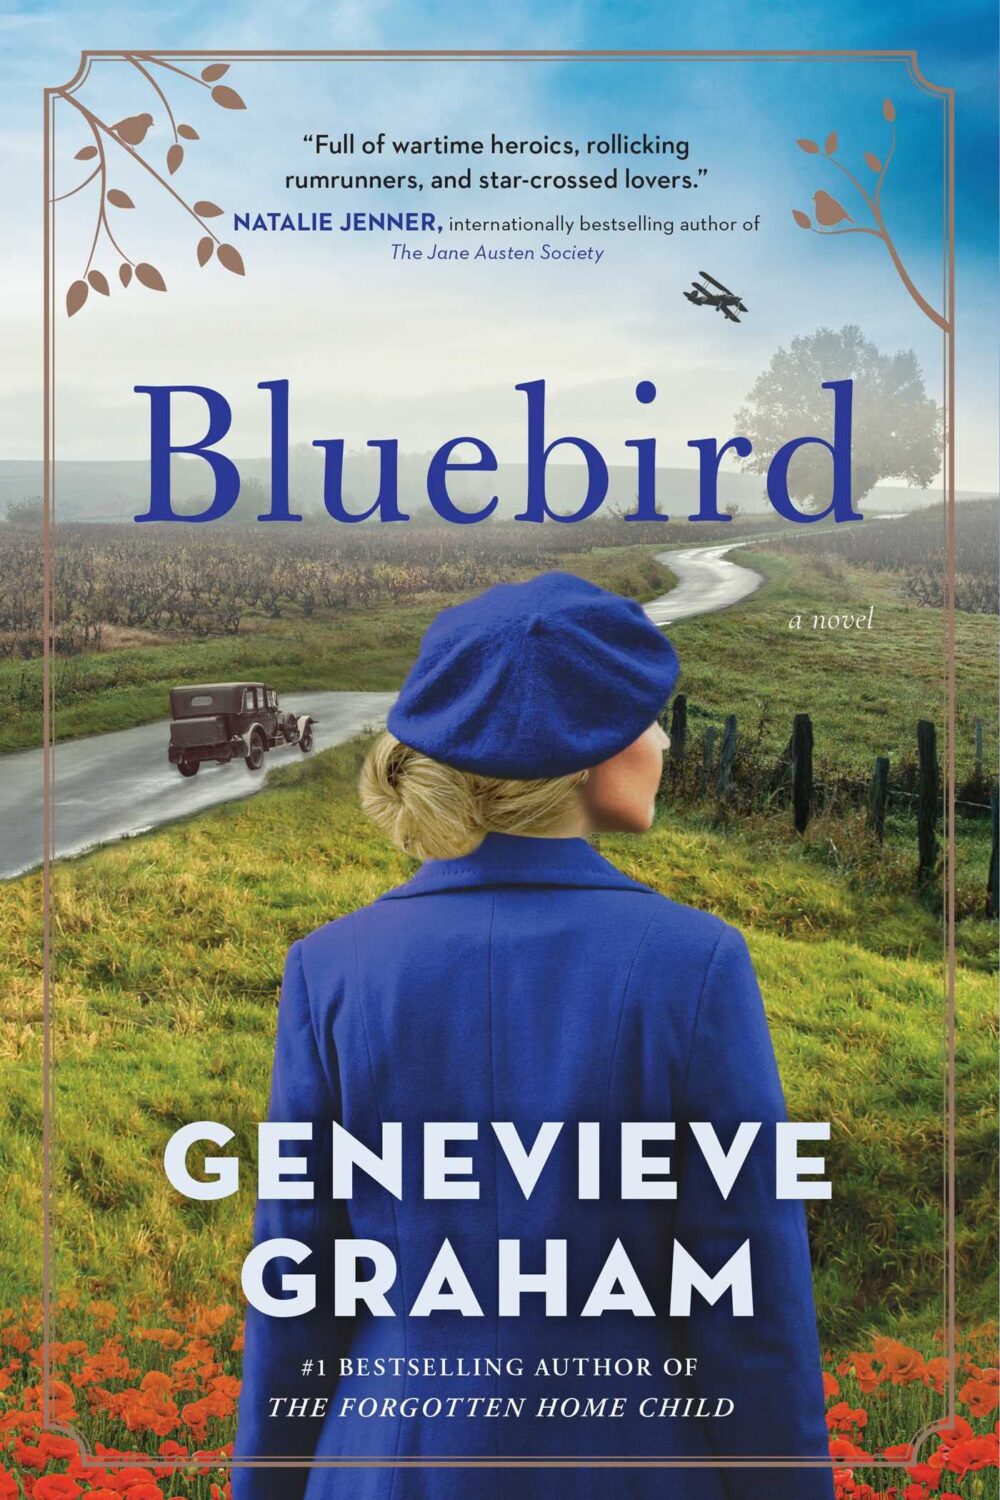 Bluebird and more WWI books like The Alice Network.